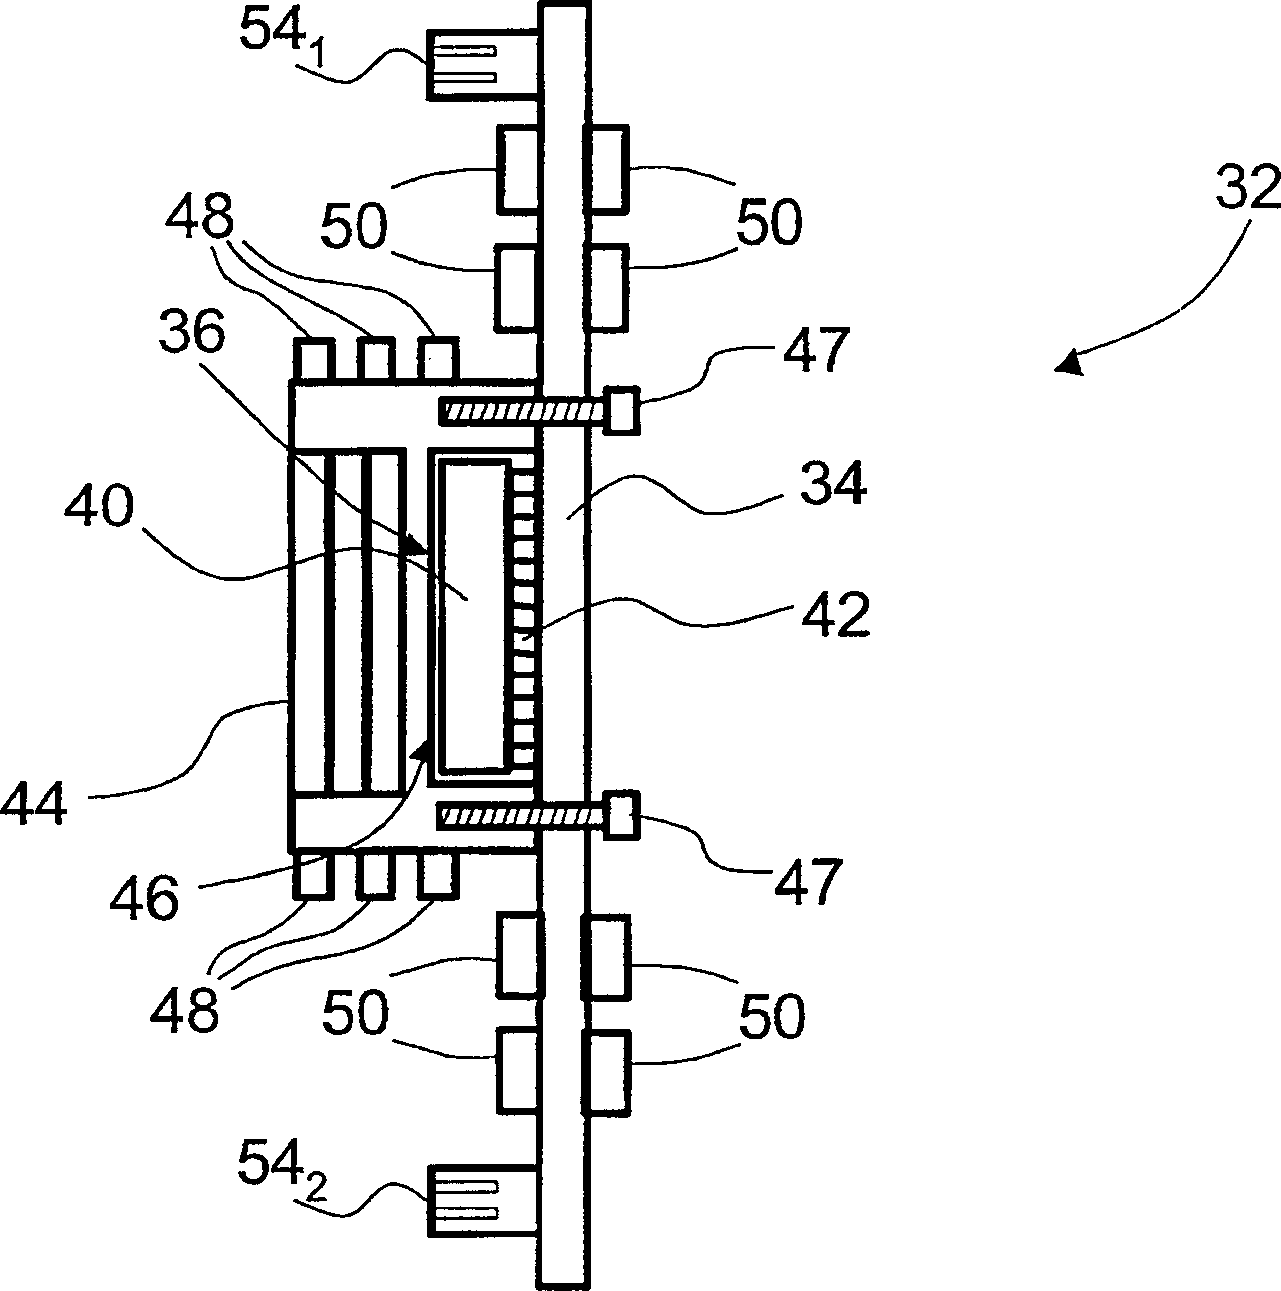 Symmetrical multiple-slice computed tomography data measuring system